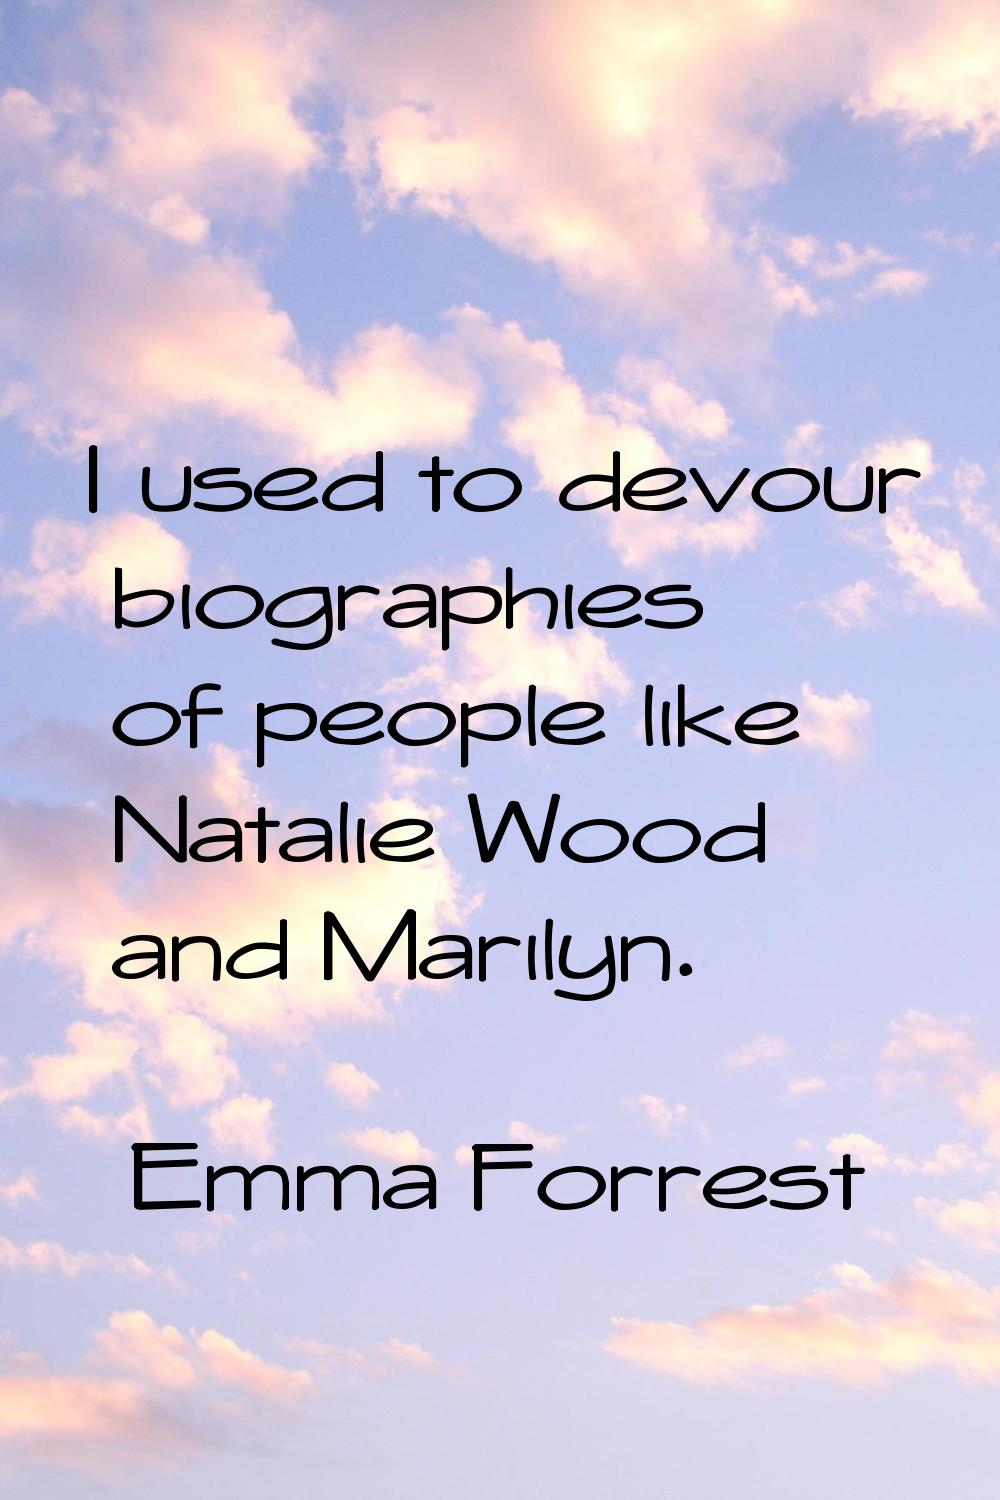 I used to devour biographies of people like Natalie Wood and Marilyn.